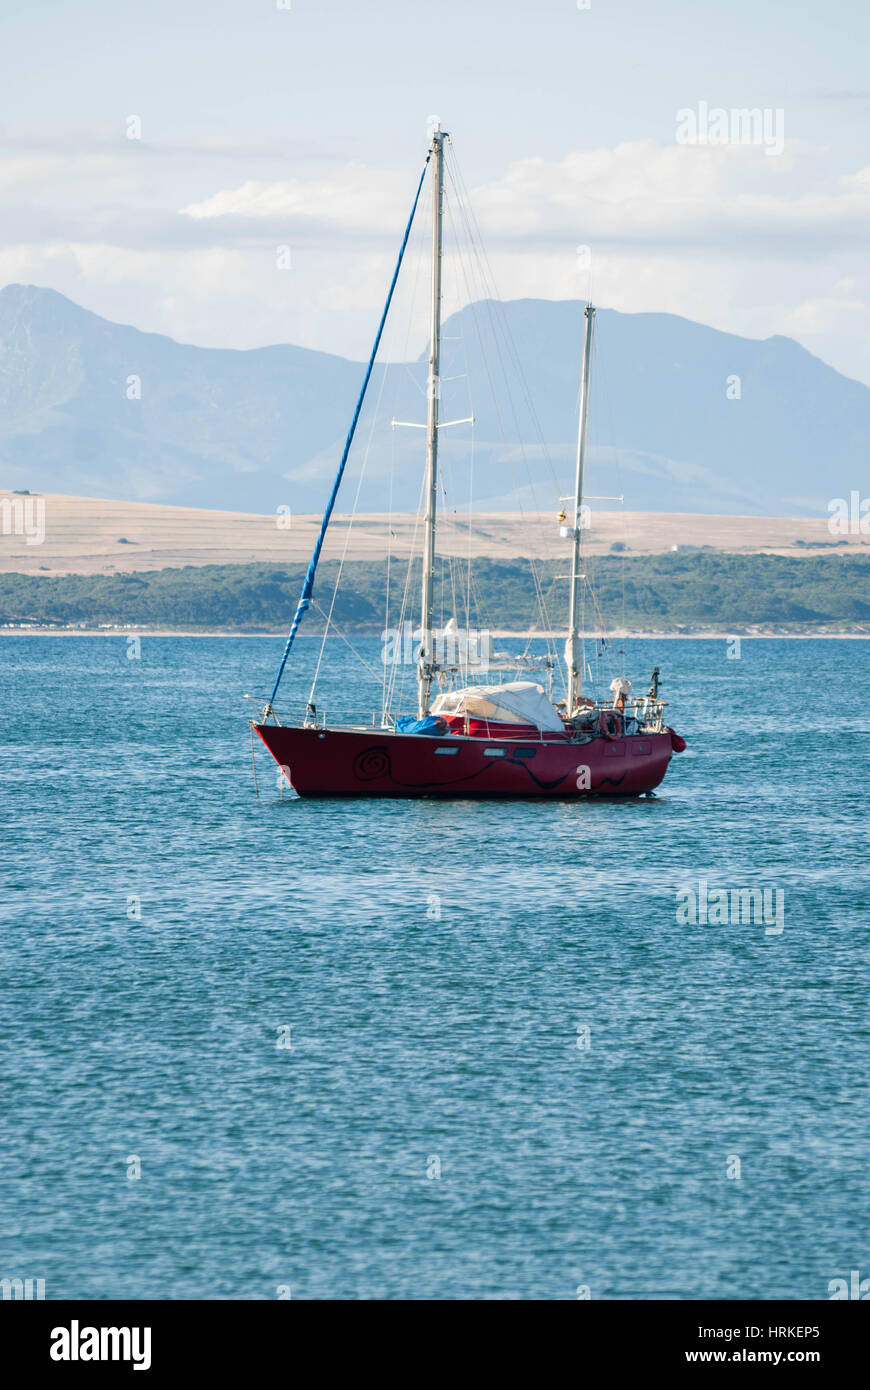 A red yacht on a calm ocean in Mossel Bay, South Africa Stock Photo